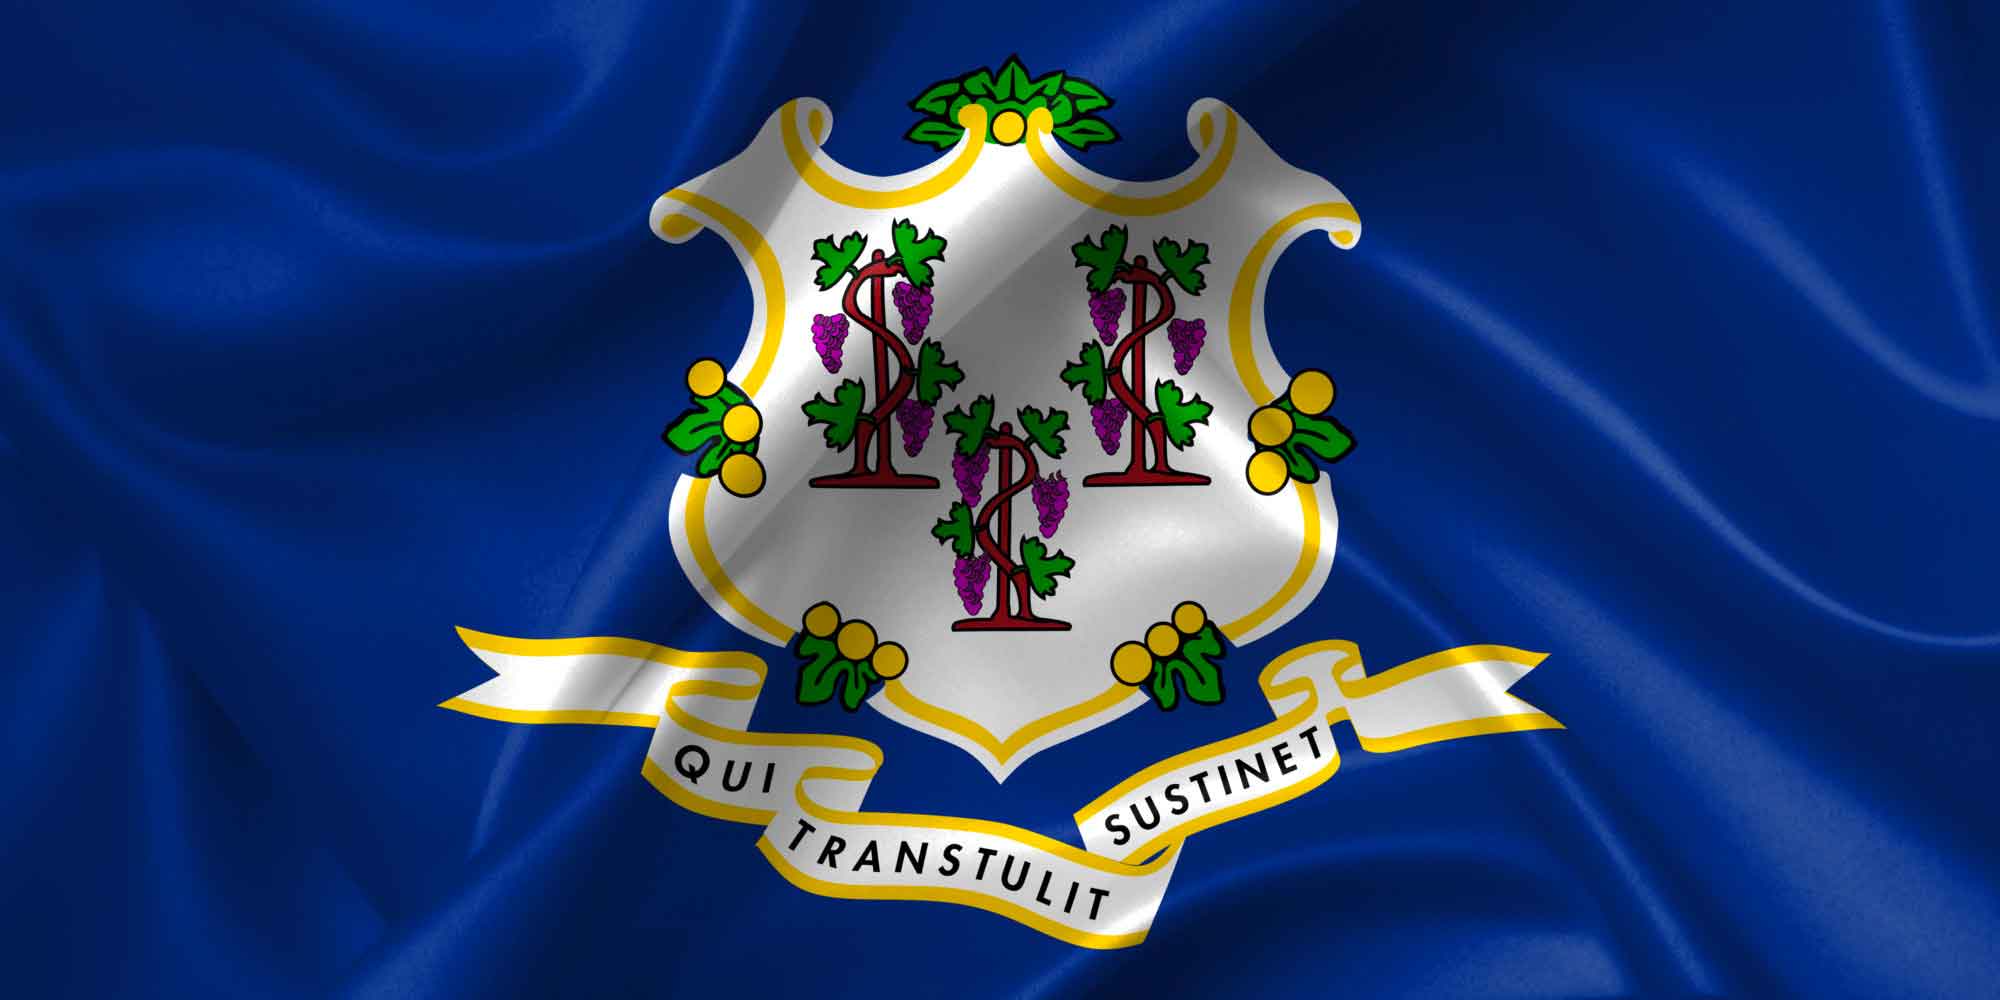 The official flag of the State of Connecticut